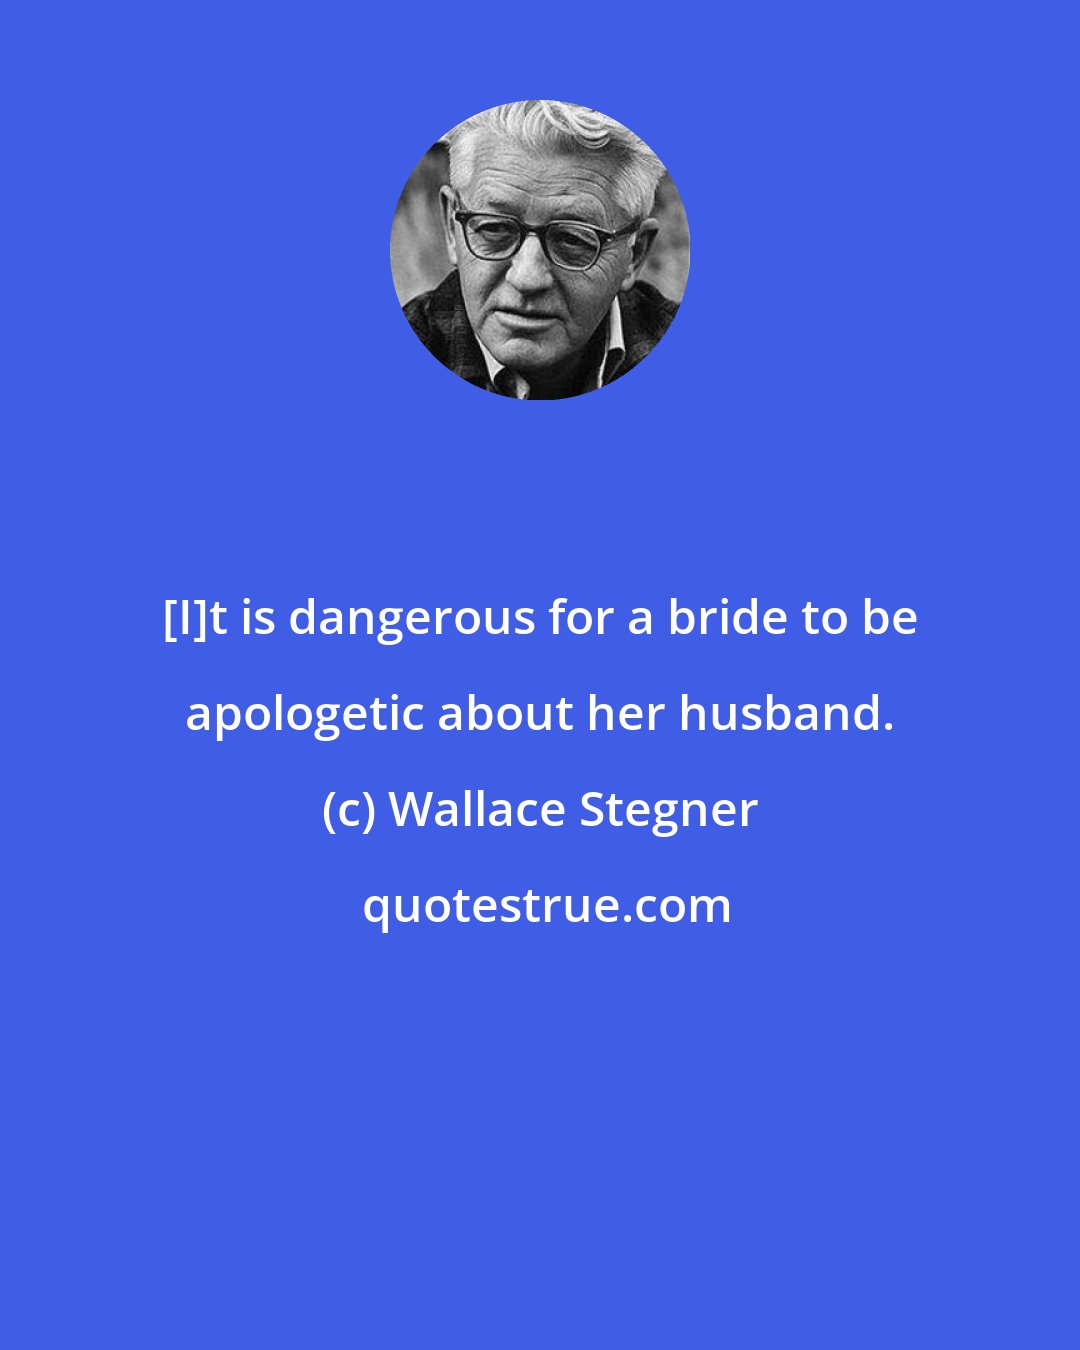 Wallace Stegner: [I]t is dangerous for a bride to be apologetic about her husband.